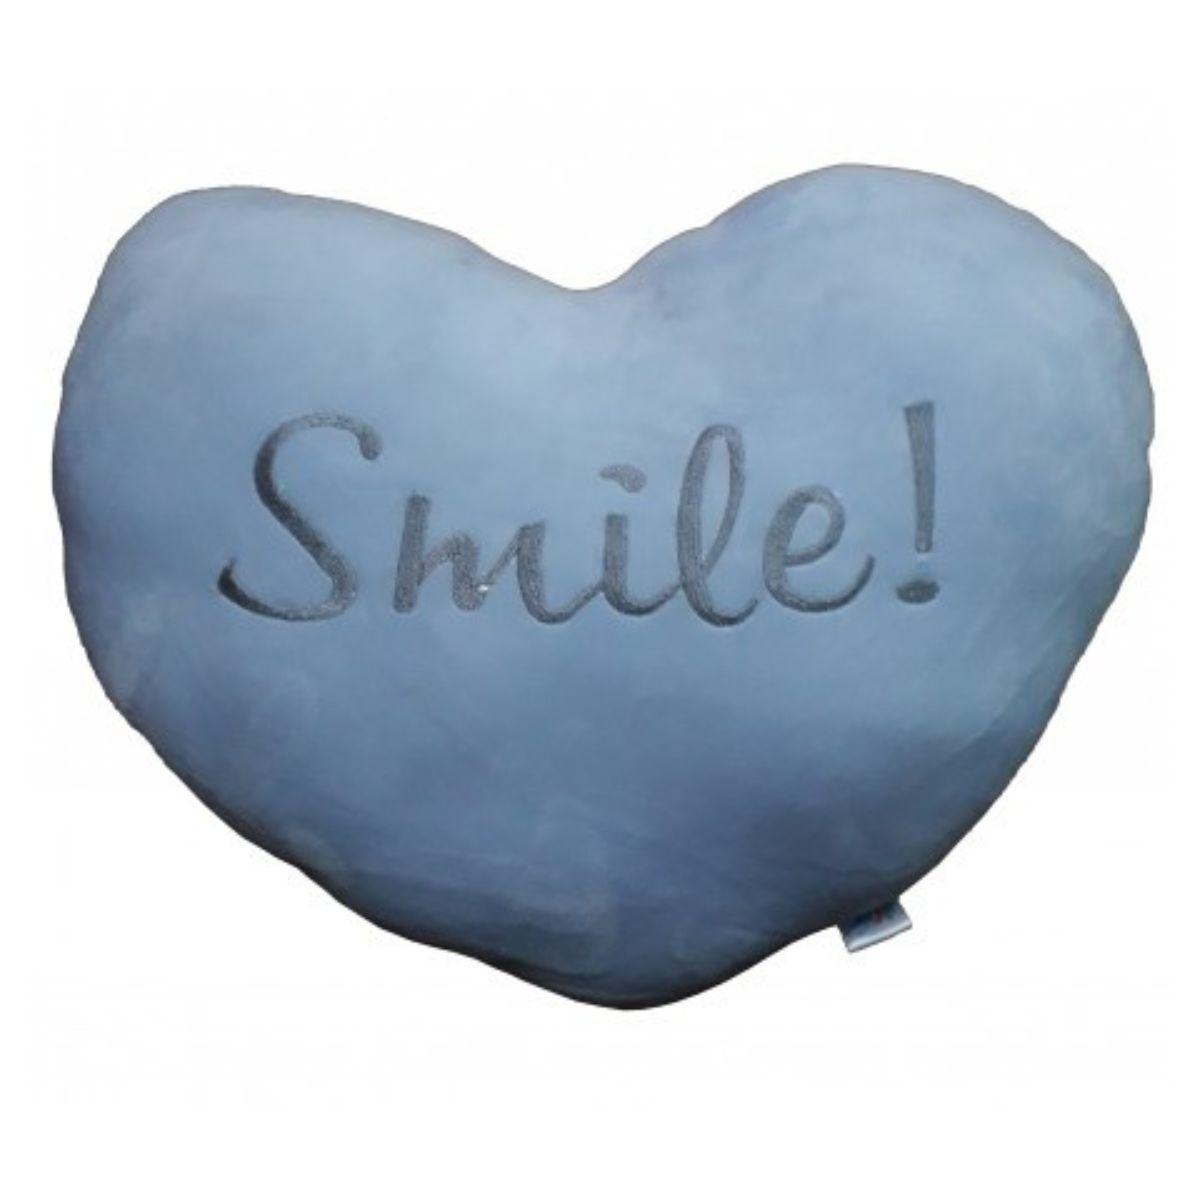 Smiley Heart Pillow - tcistarhealthproducts